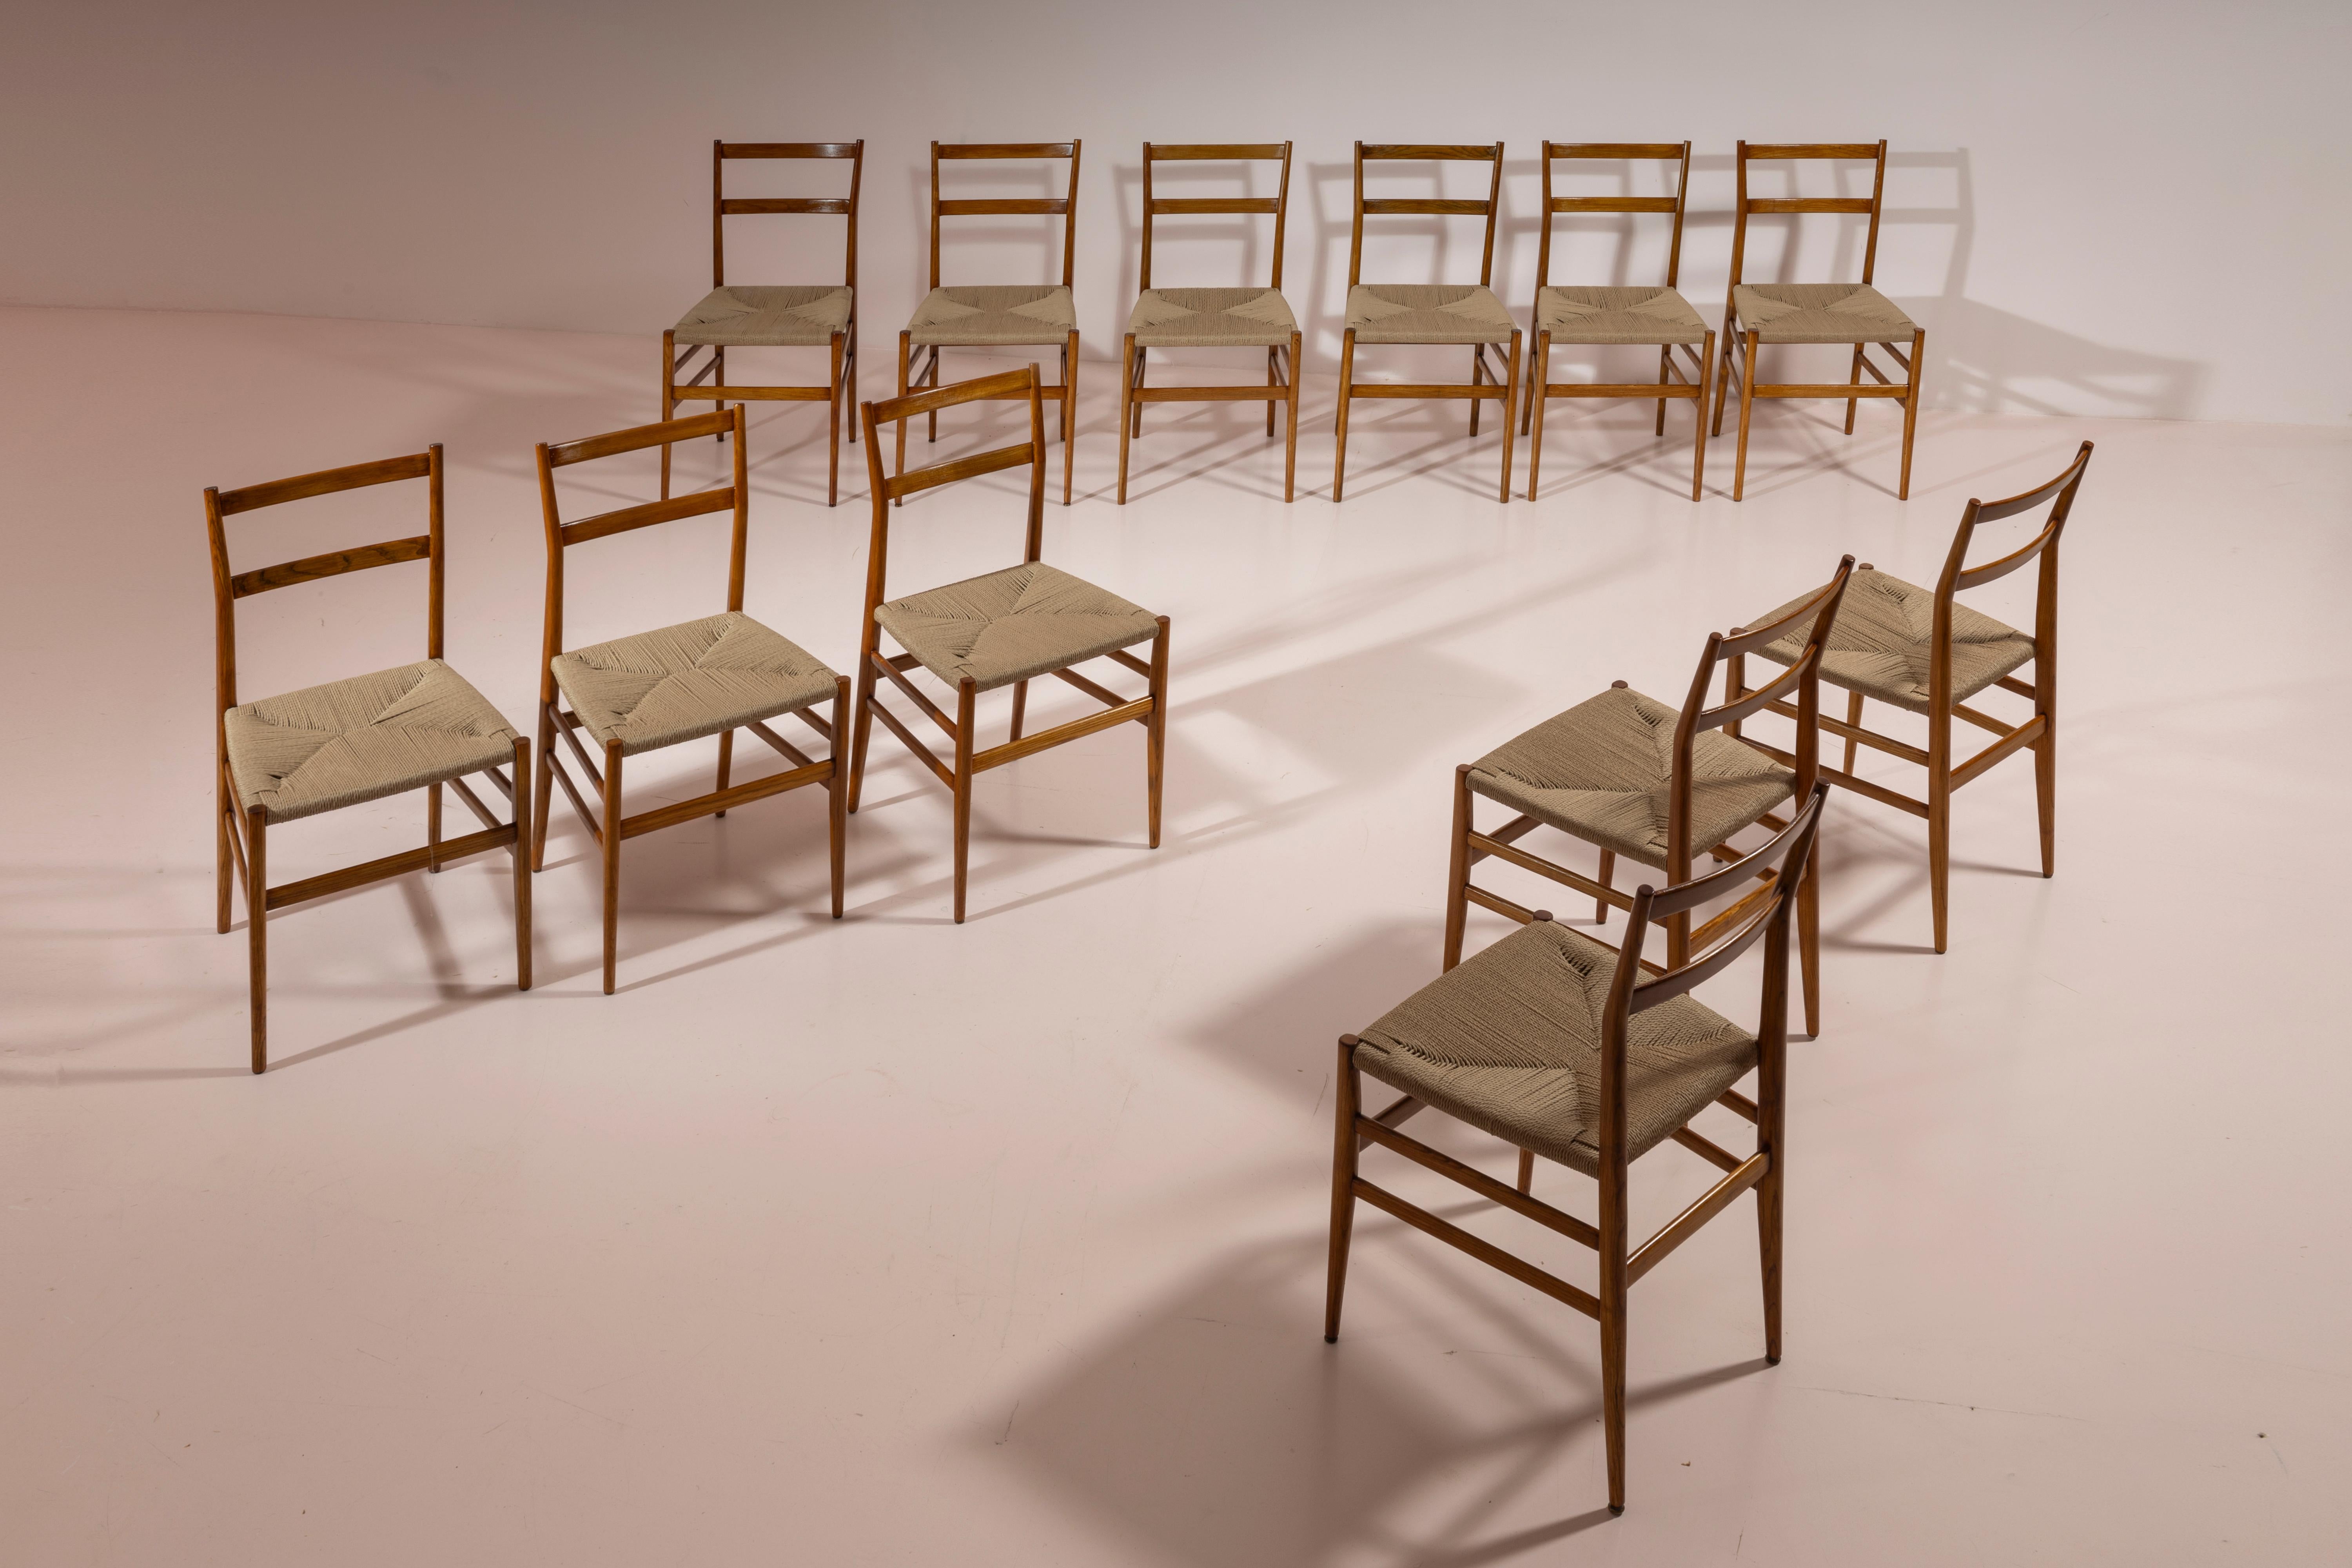 Set of 12 ash wood chairs with hand-knotted rope seats, designed by Gio Ponti as model 646 Leggera in 1951 and manufactured by Figli di Amedeo Cassina during the late 1950s.

Conceptualized by Gio Ponti in 1951, this chair is instantly recognizable